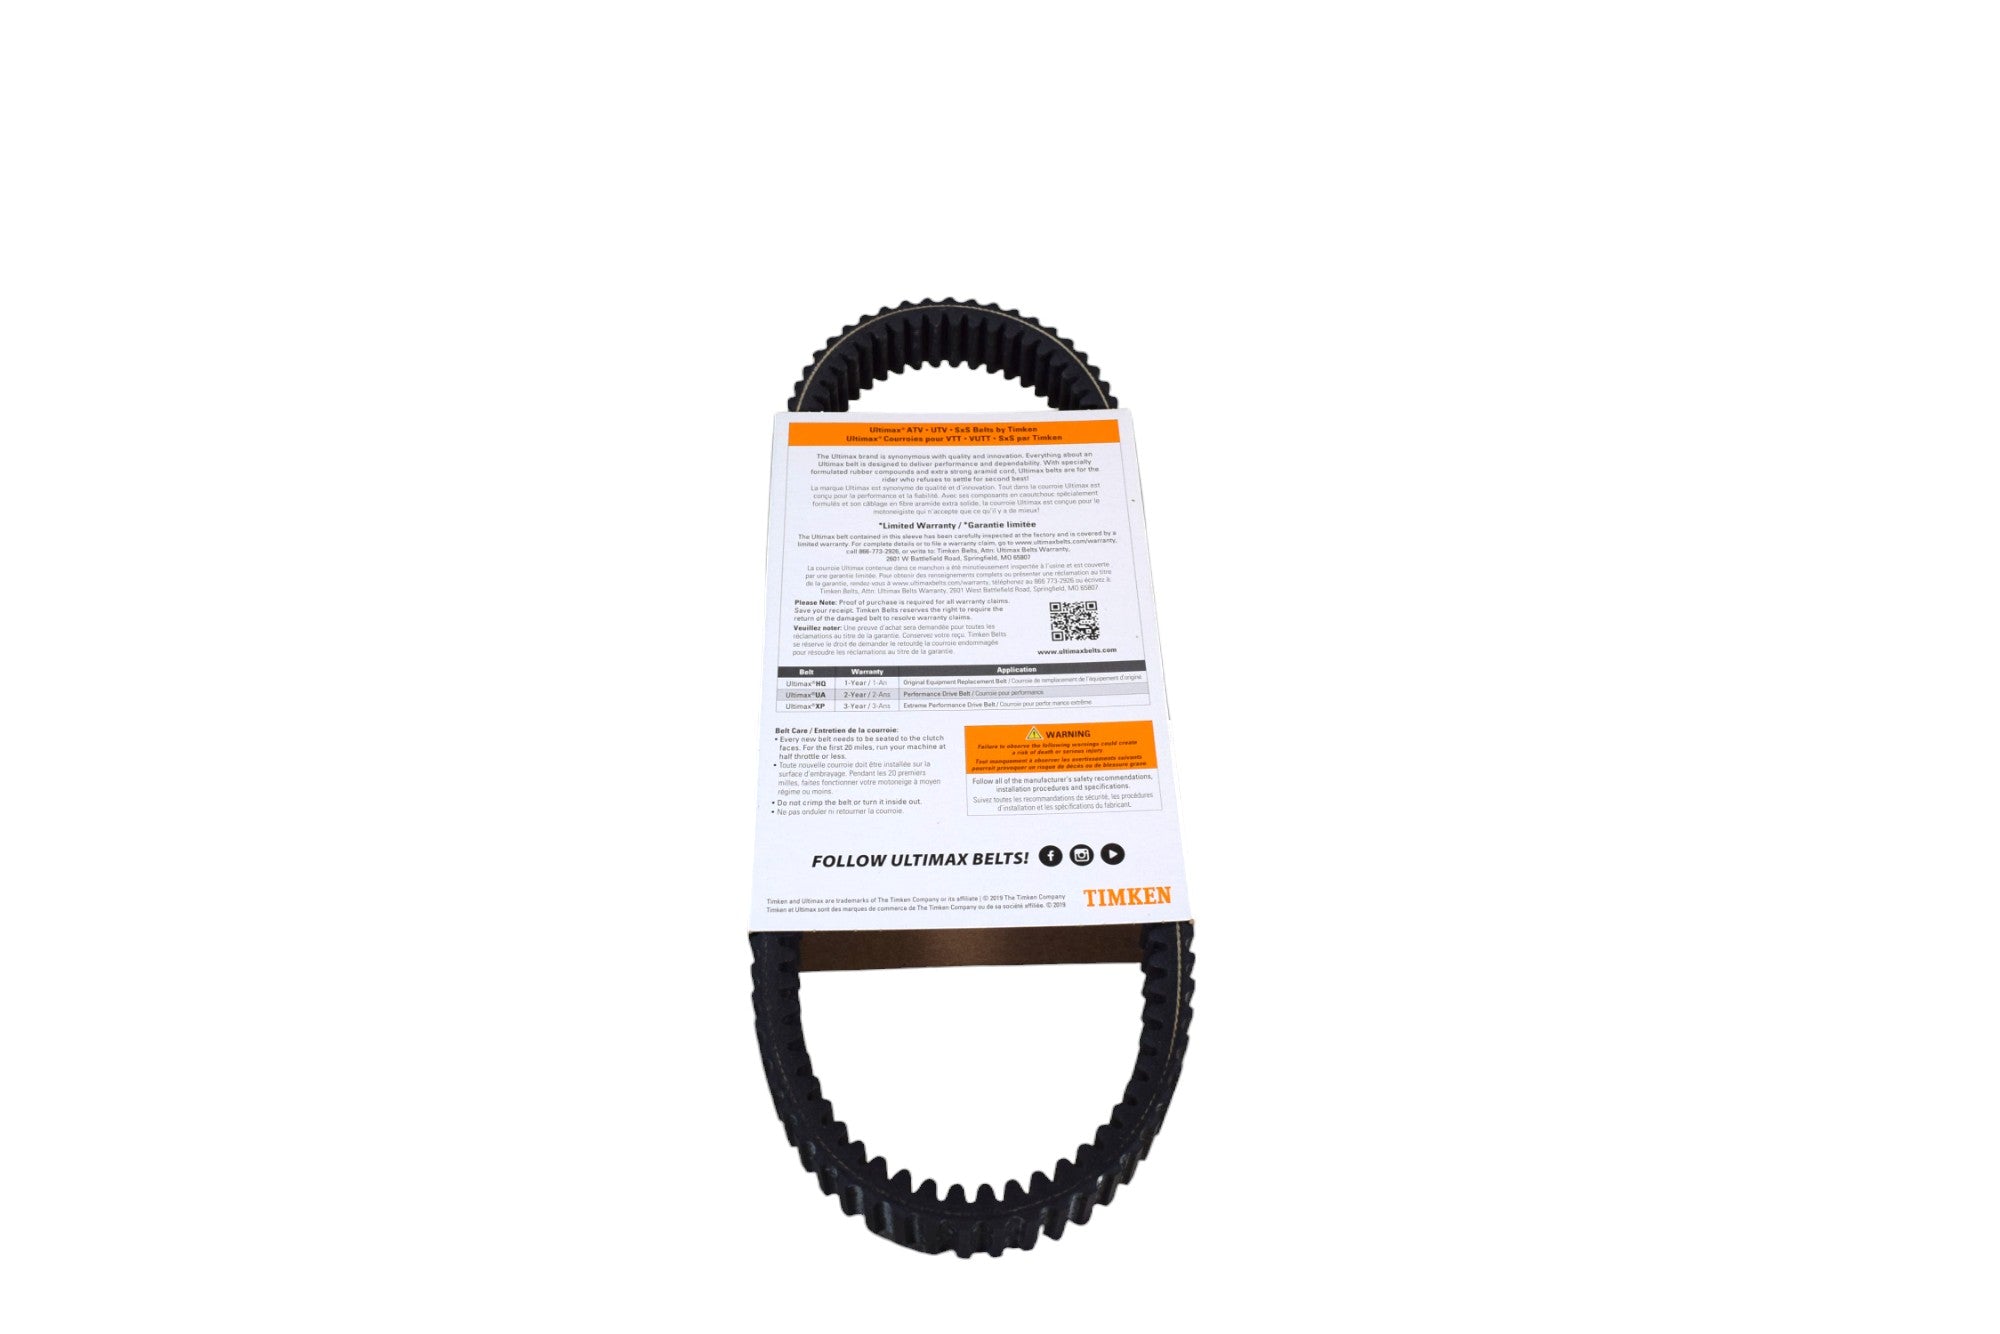 Ultimax UXP419 Drive Belt for Can-Am and Bombardier OEM Replacement for 715900030 (Made in USA)